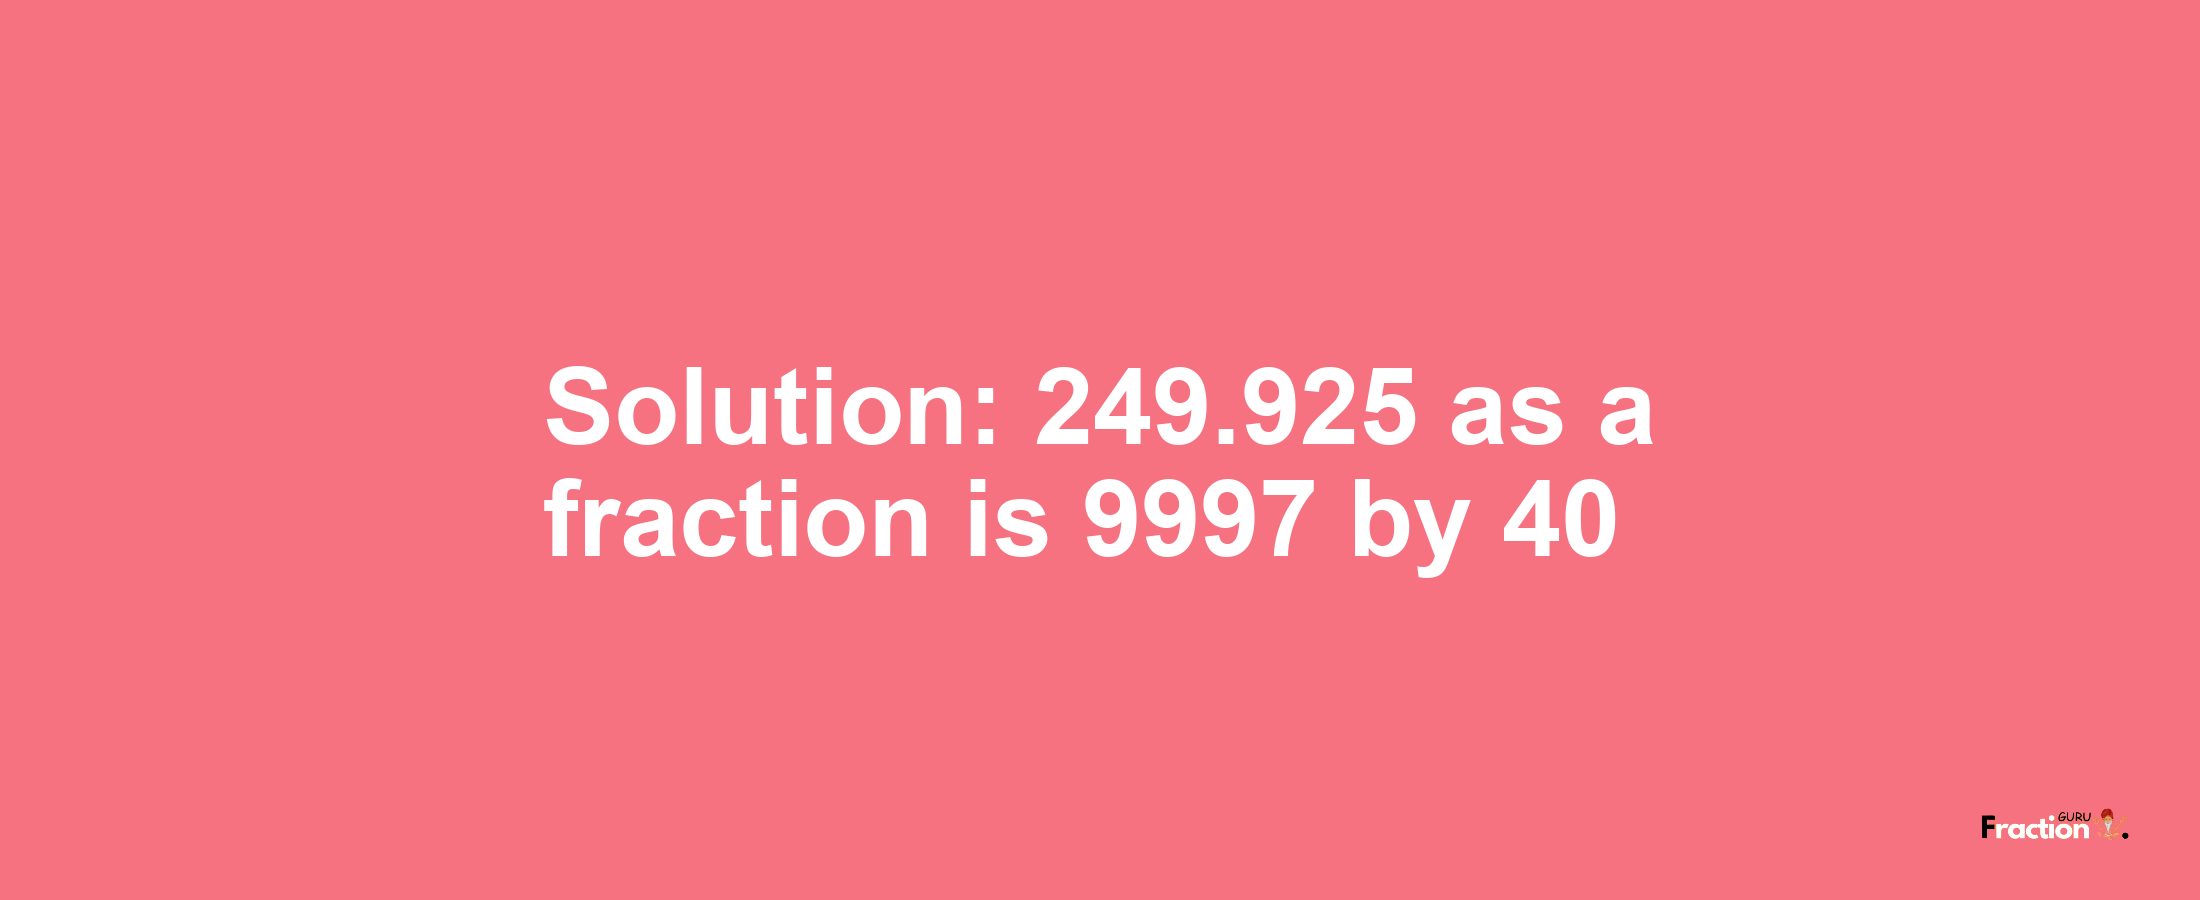 Solution:249.925 as a fraction is 9997/40